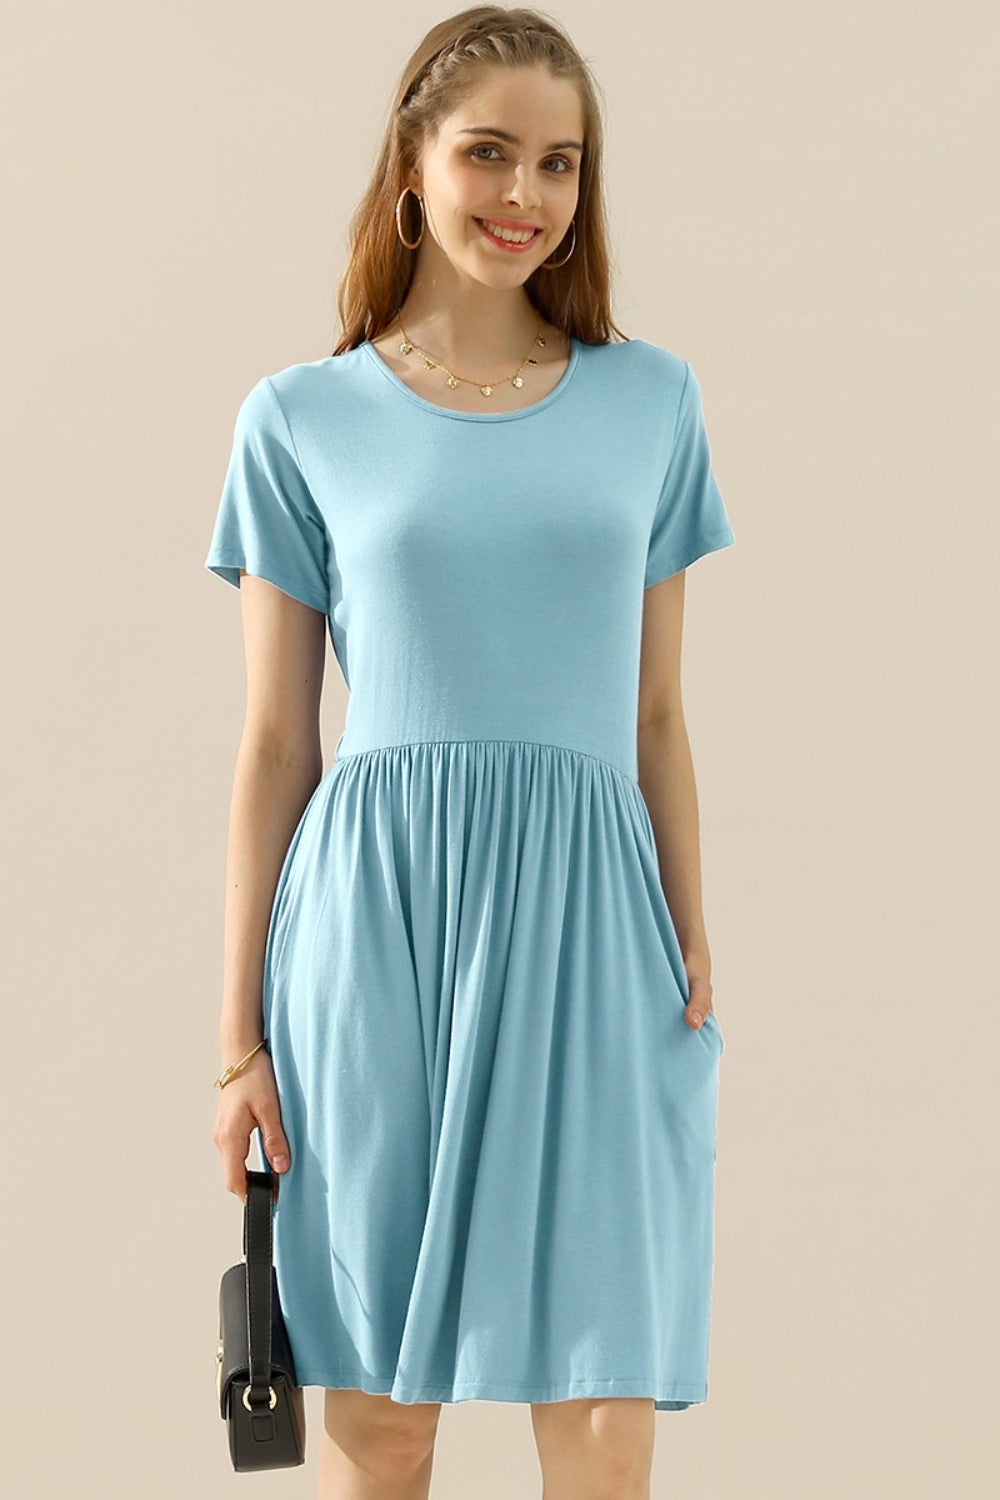 Ninexis Full Size Round Neck Ruched Dress with Pockets - LT BLUE / S - DRESSES - Mixed